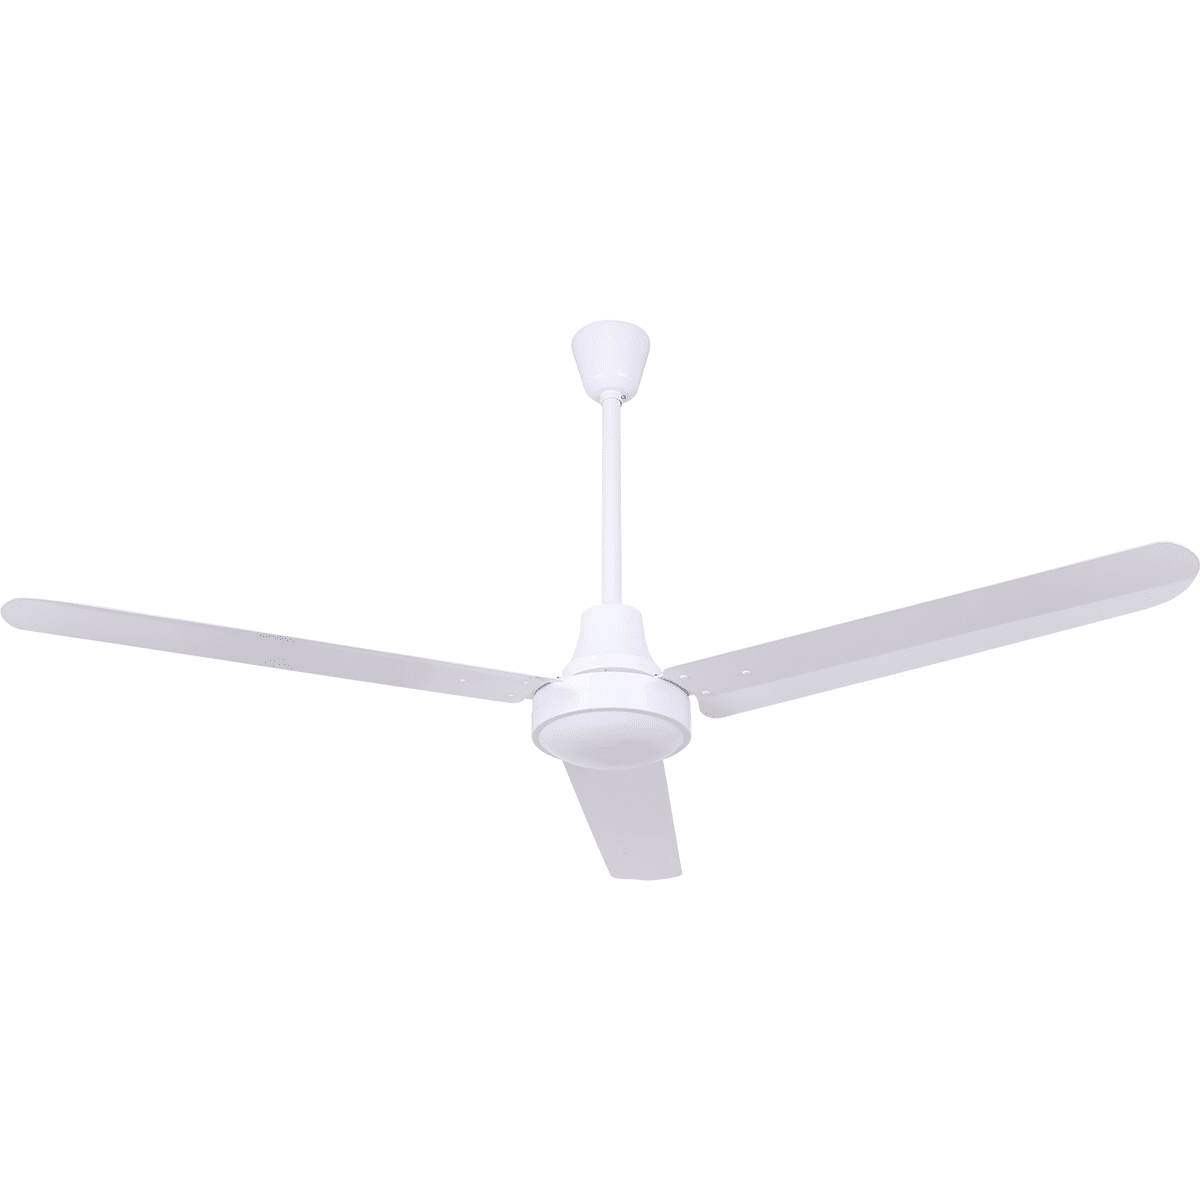 Canarm High Performance Weather Proof DC Industrial Fan - 56-in White